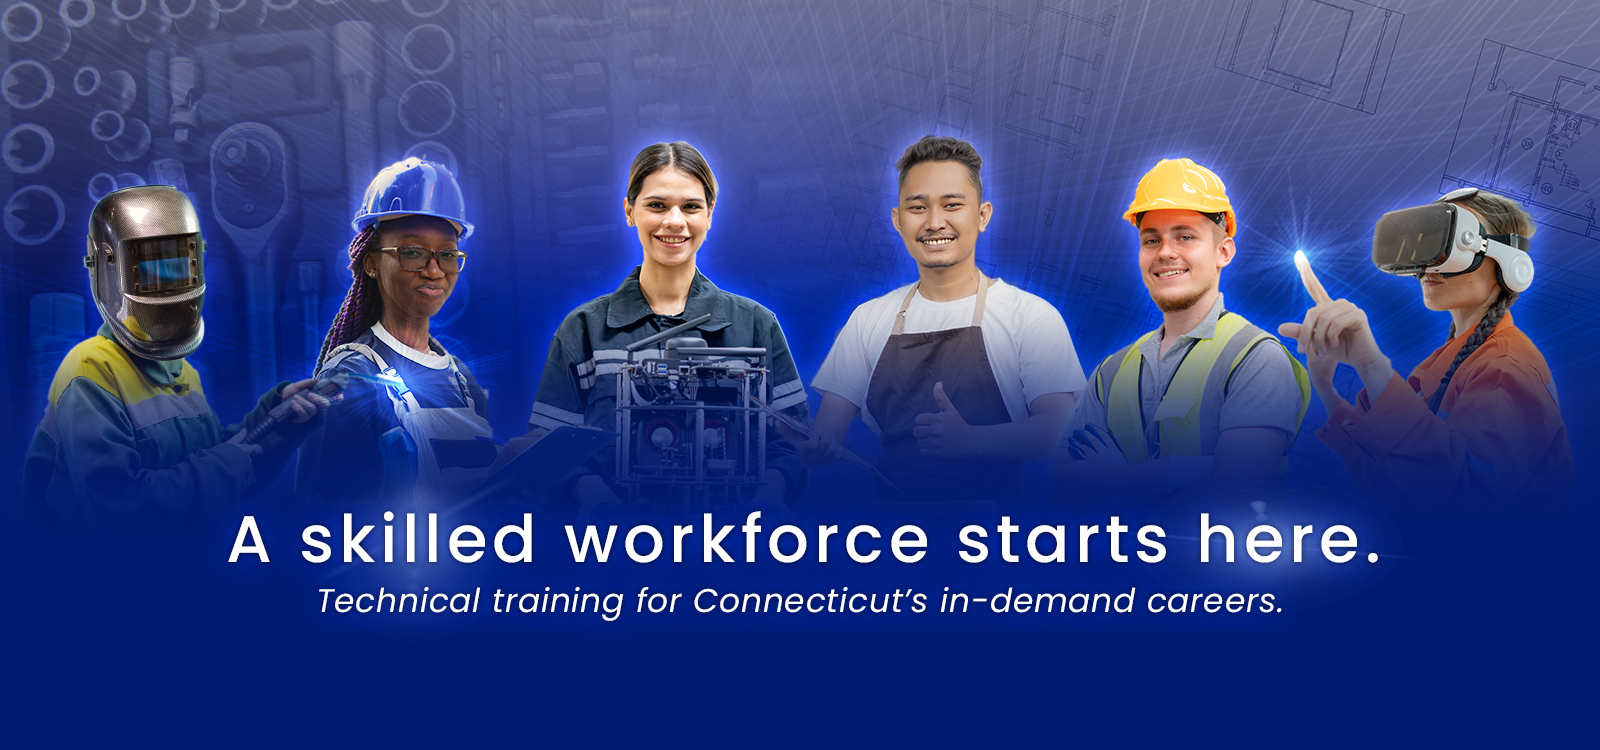 Image of six trade students with text that says "A skilled workforce starts here. Technical training for Connecticut's in-demand careers."